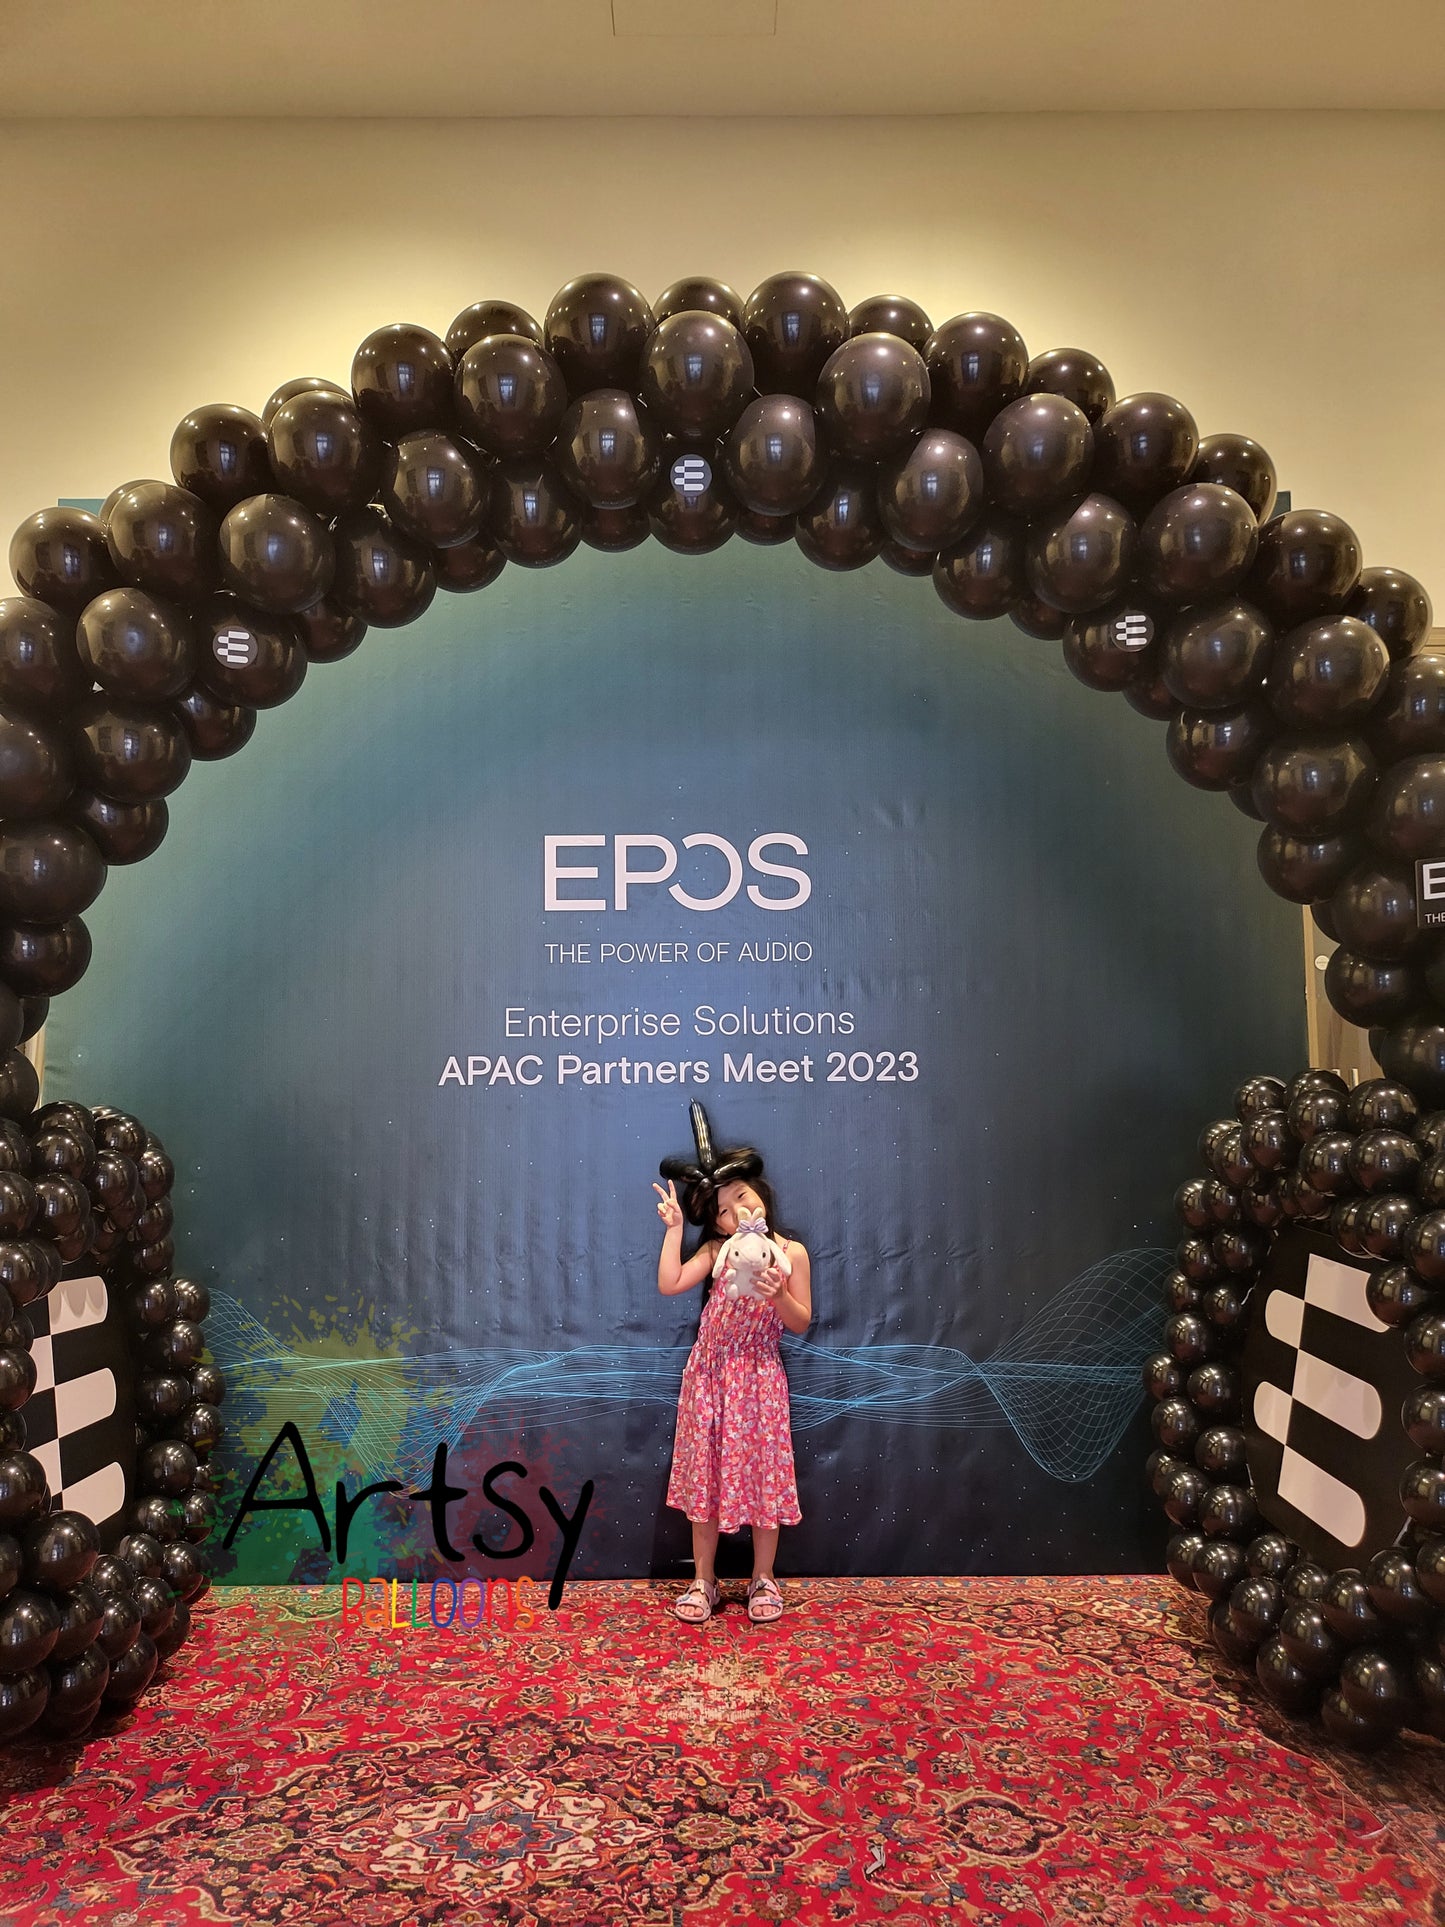 Headphone Balloon Arch & PVC Wrapped Wooden Frame Backdrop